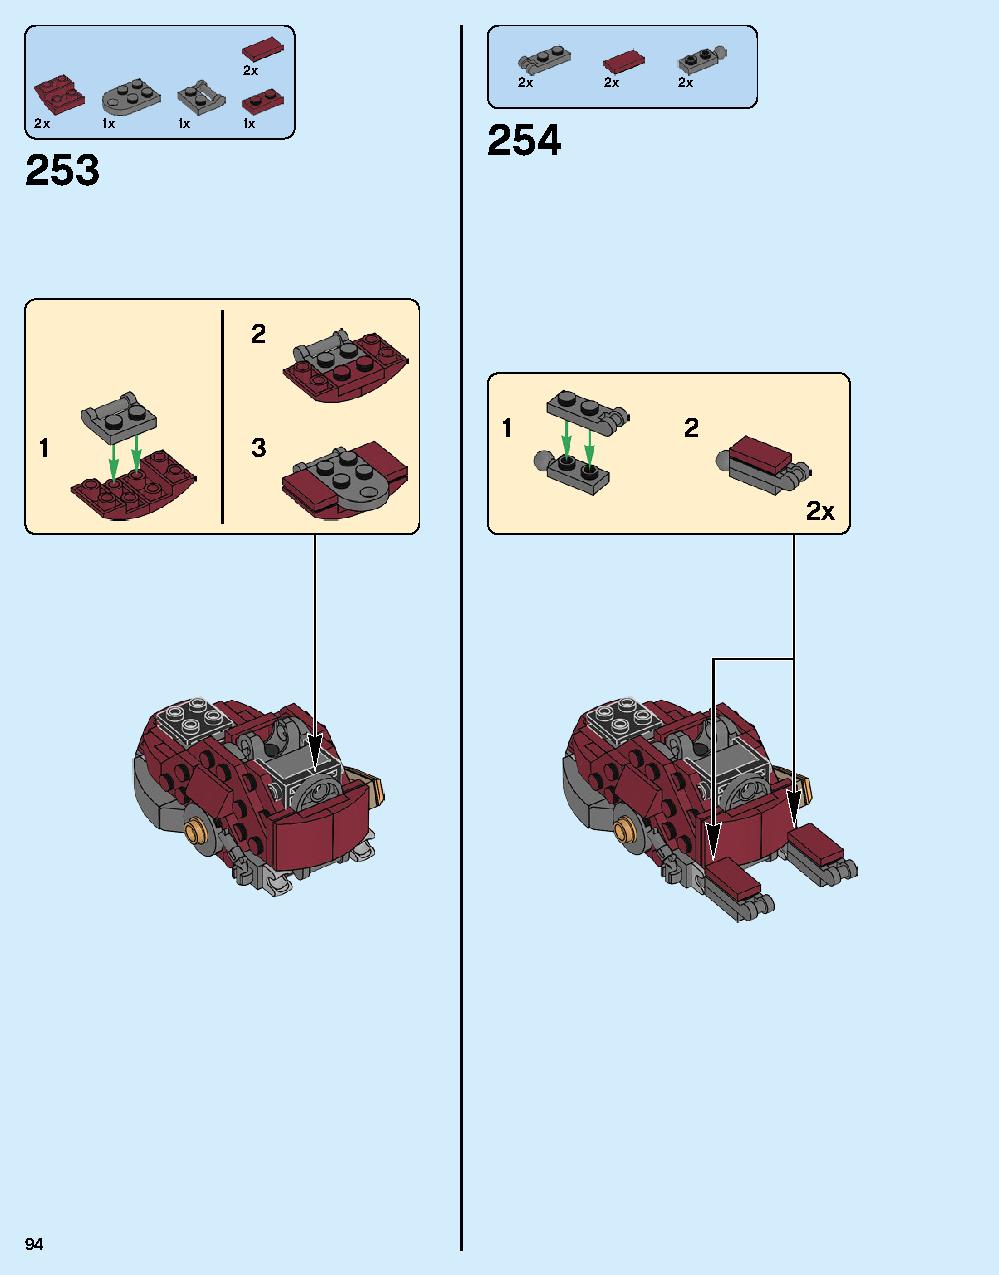 The Hulkbuster: Ultron Edition 76105 LEGO information LEGO instructions 94 page